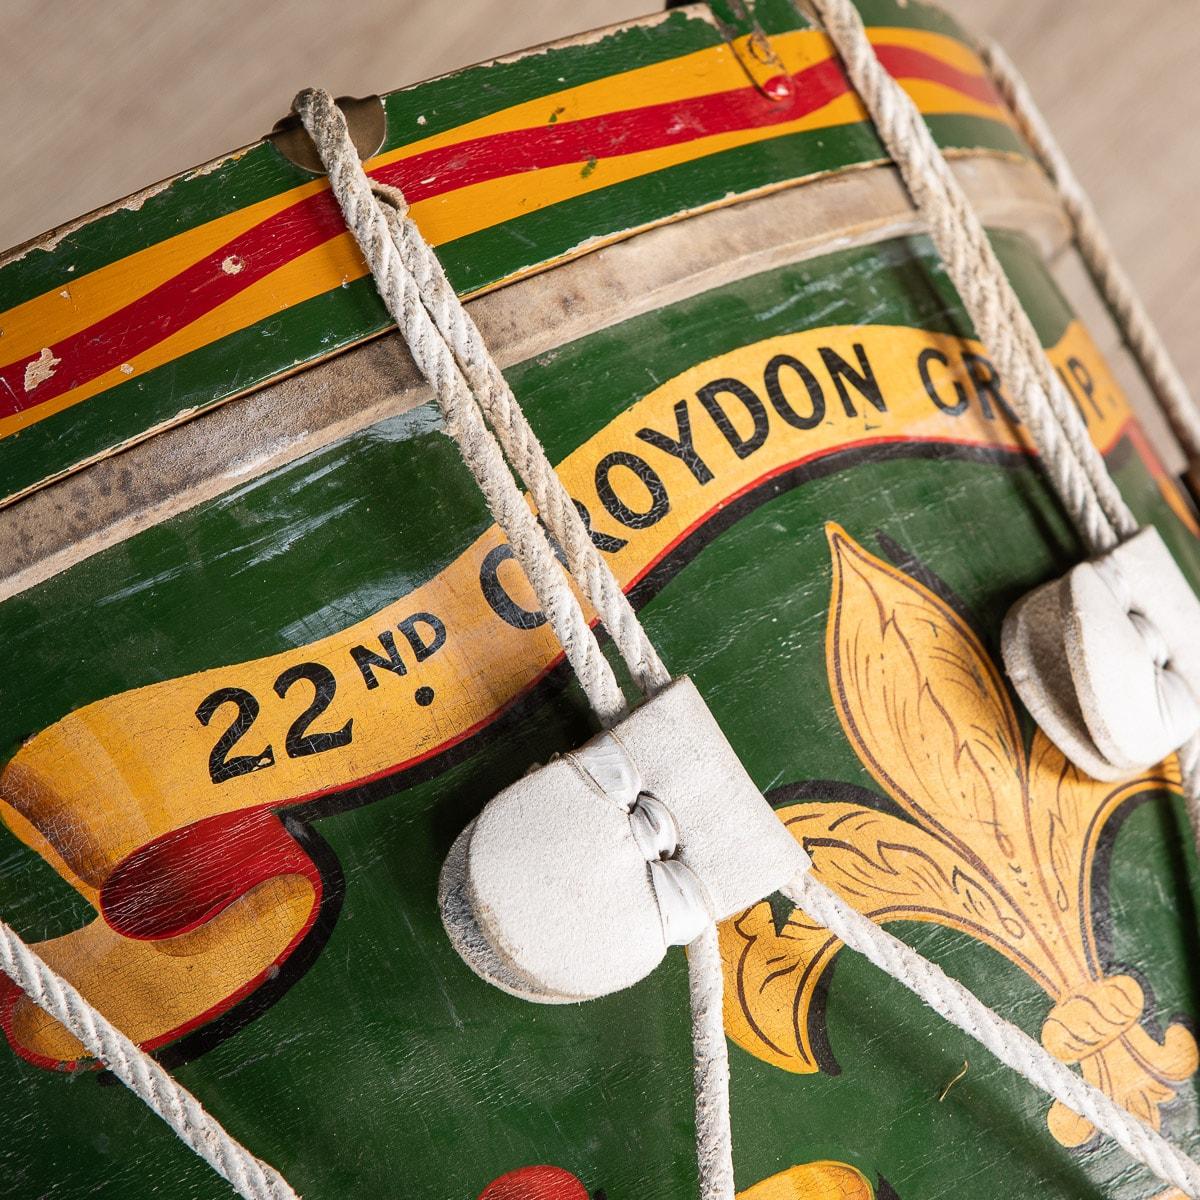 20th Century British Ceremonial Drum from the 22nd Croydon Group 16